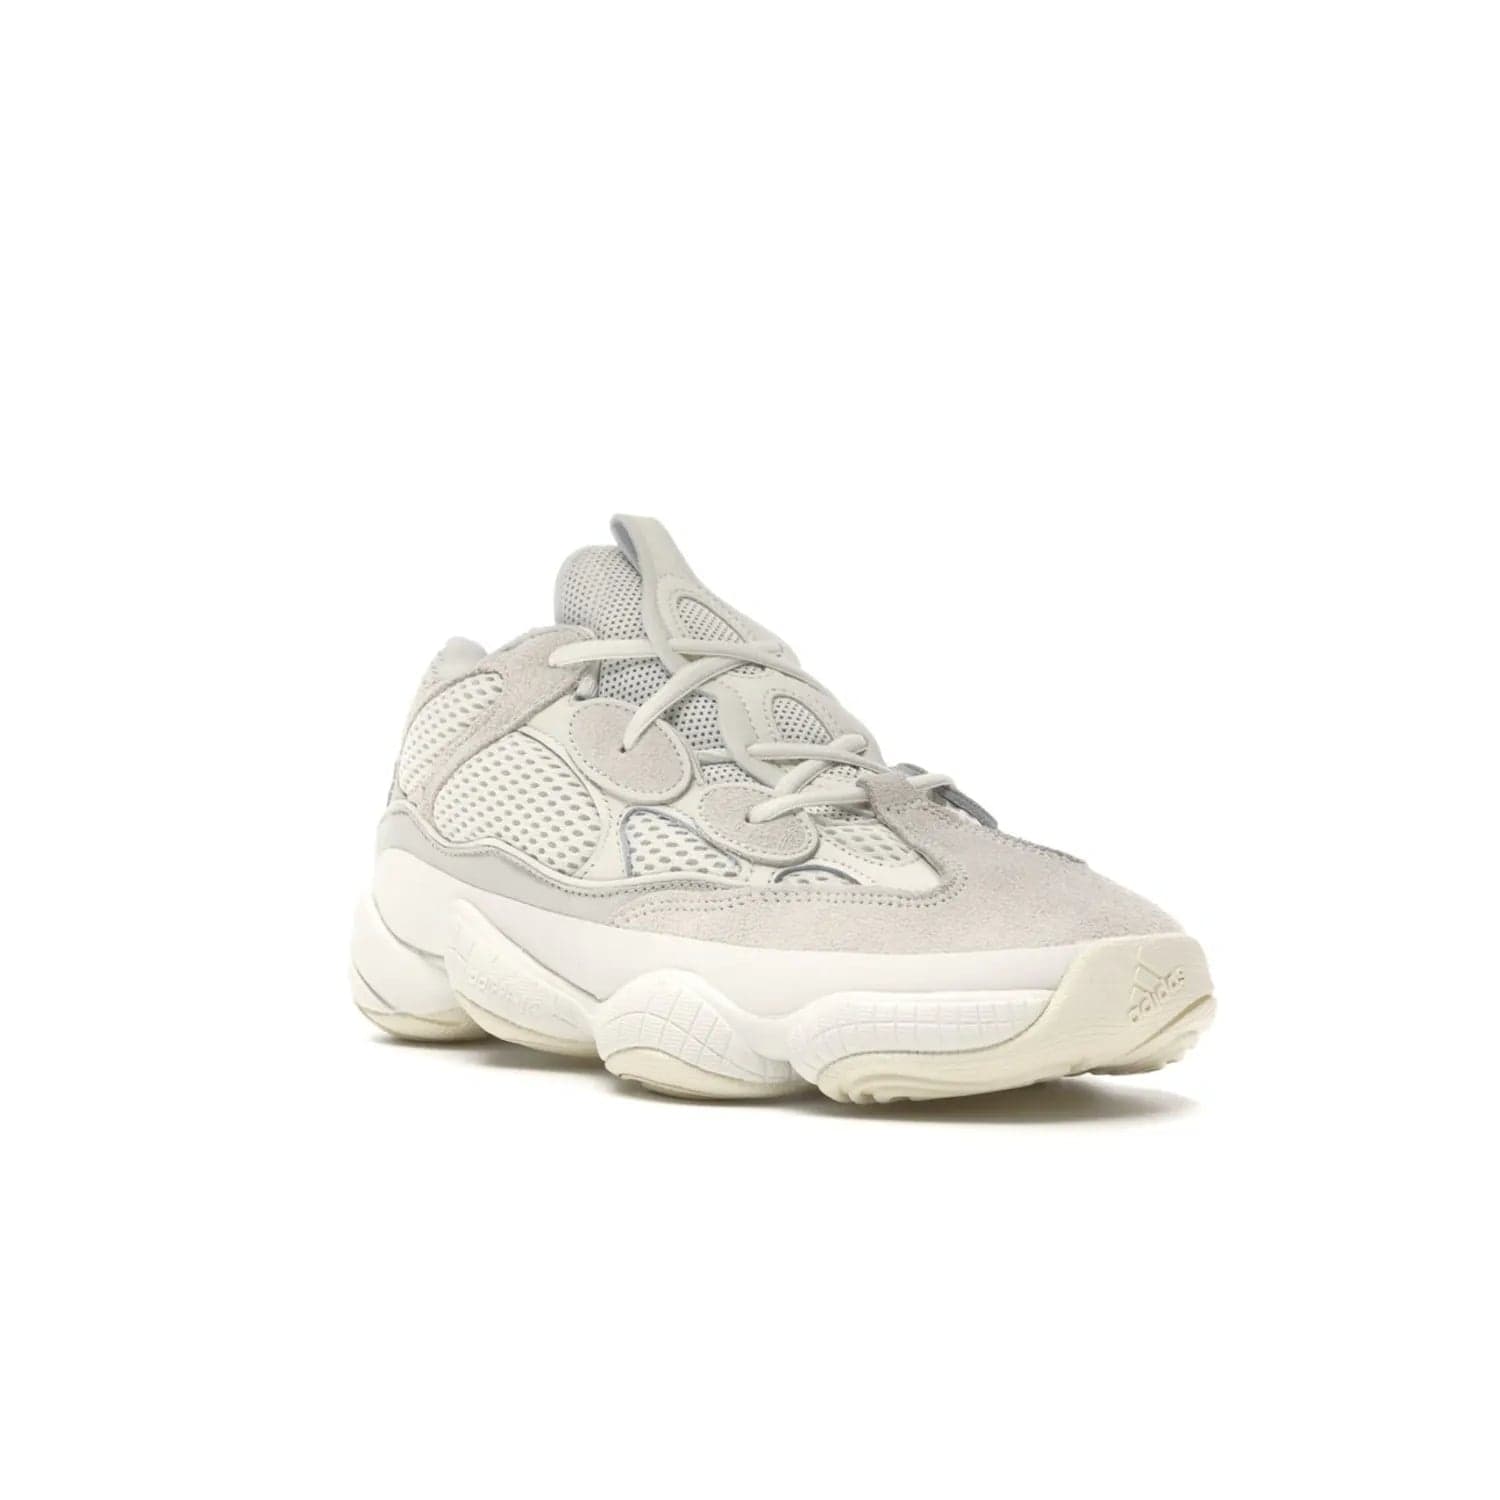 adidas Yeezy 500 Bone White - Image 6 - Only at www.BallersClubKickz.com - Classic look perfect for any sneaker collection. The adidas Yeezy 500 "Bone White" blends a white mesh upper with suede overlays & a chunky midsole inspired by the Adidas KB3. Complimented by a tonal-cream outsole, this timeless style is a must-have.